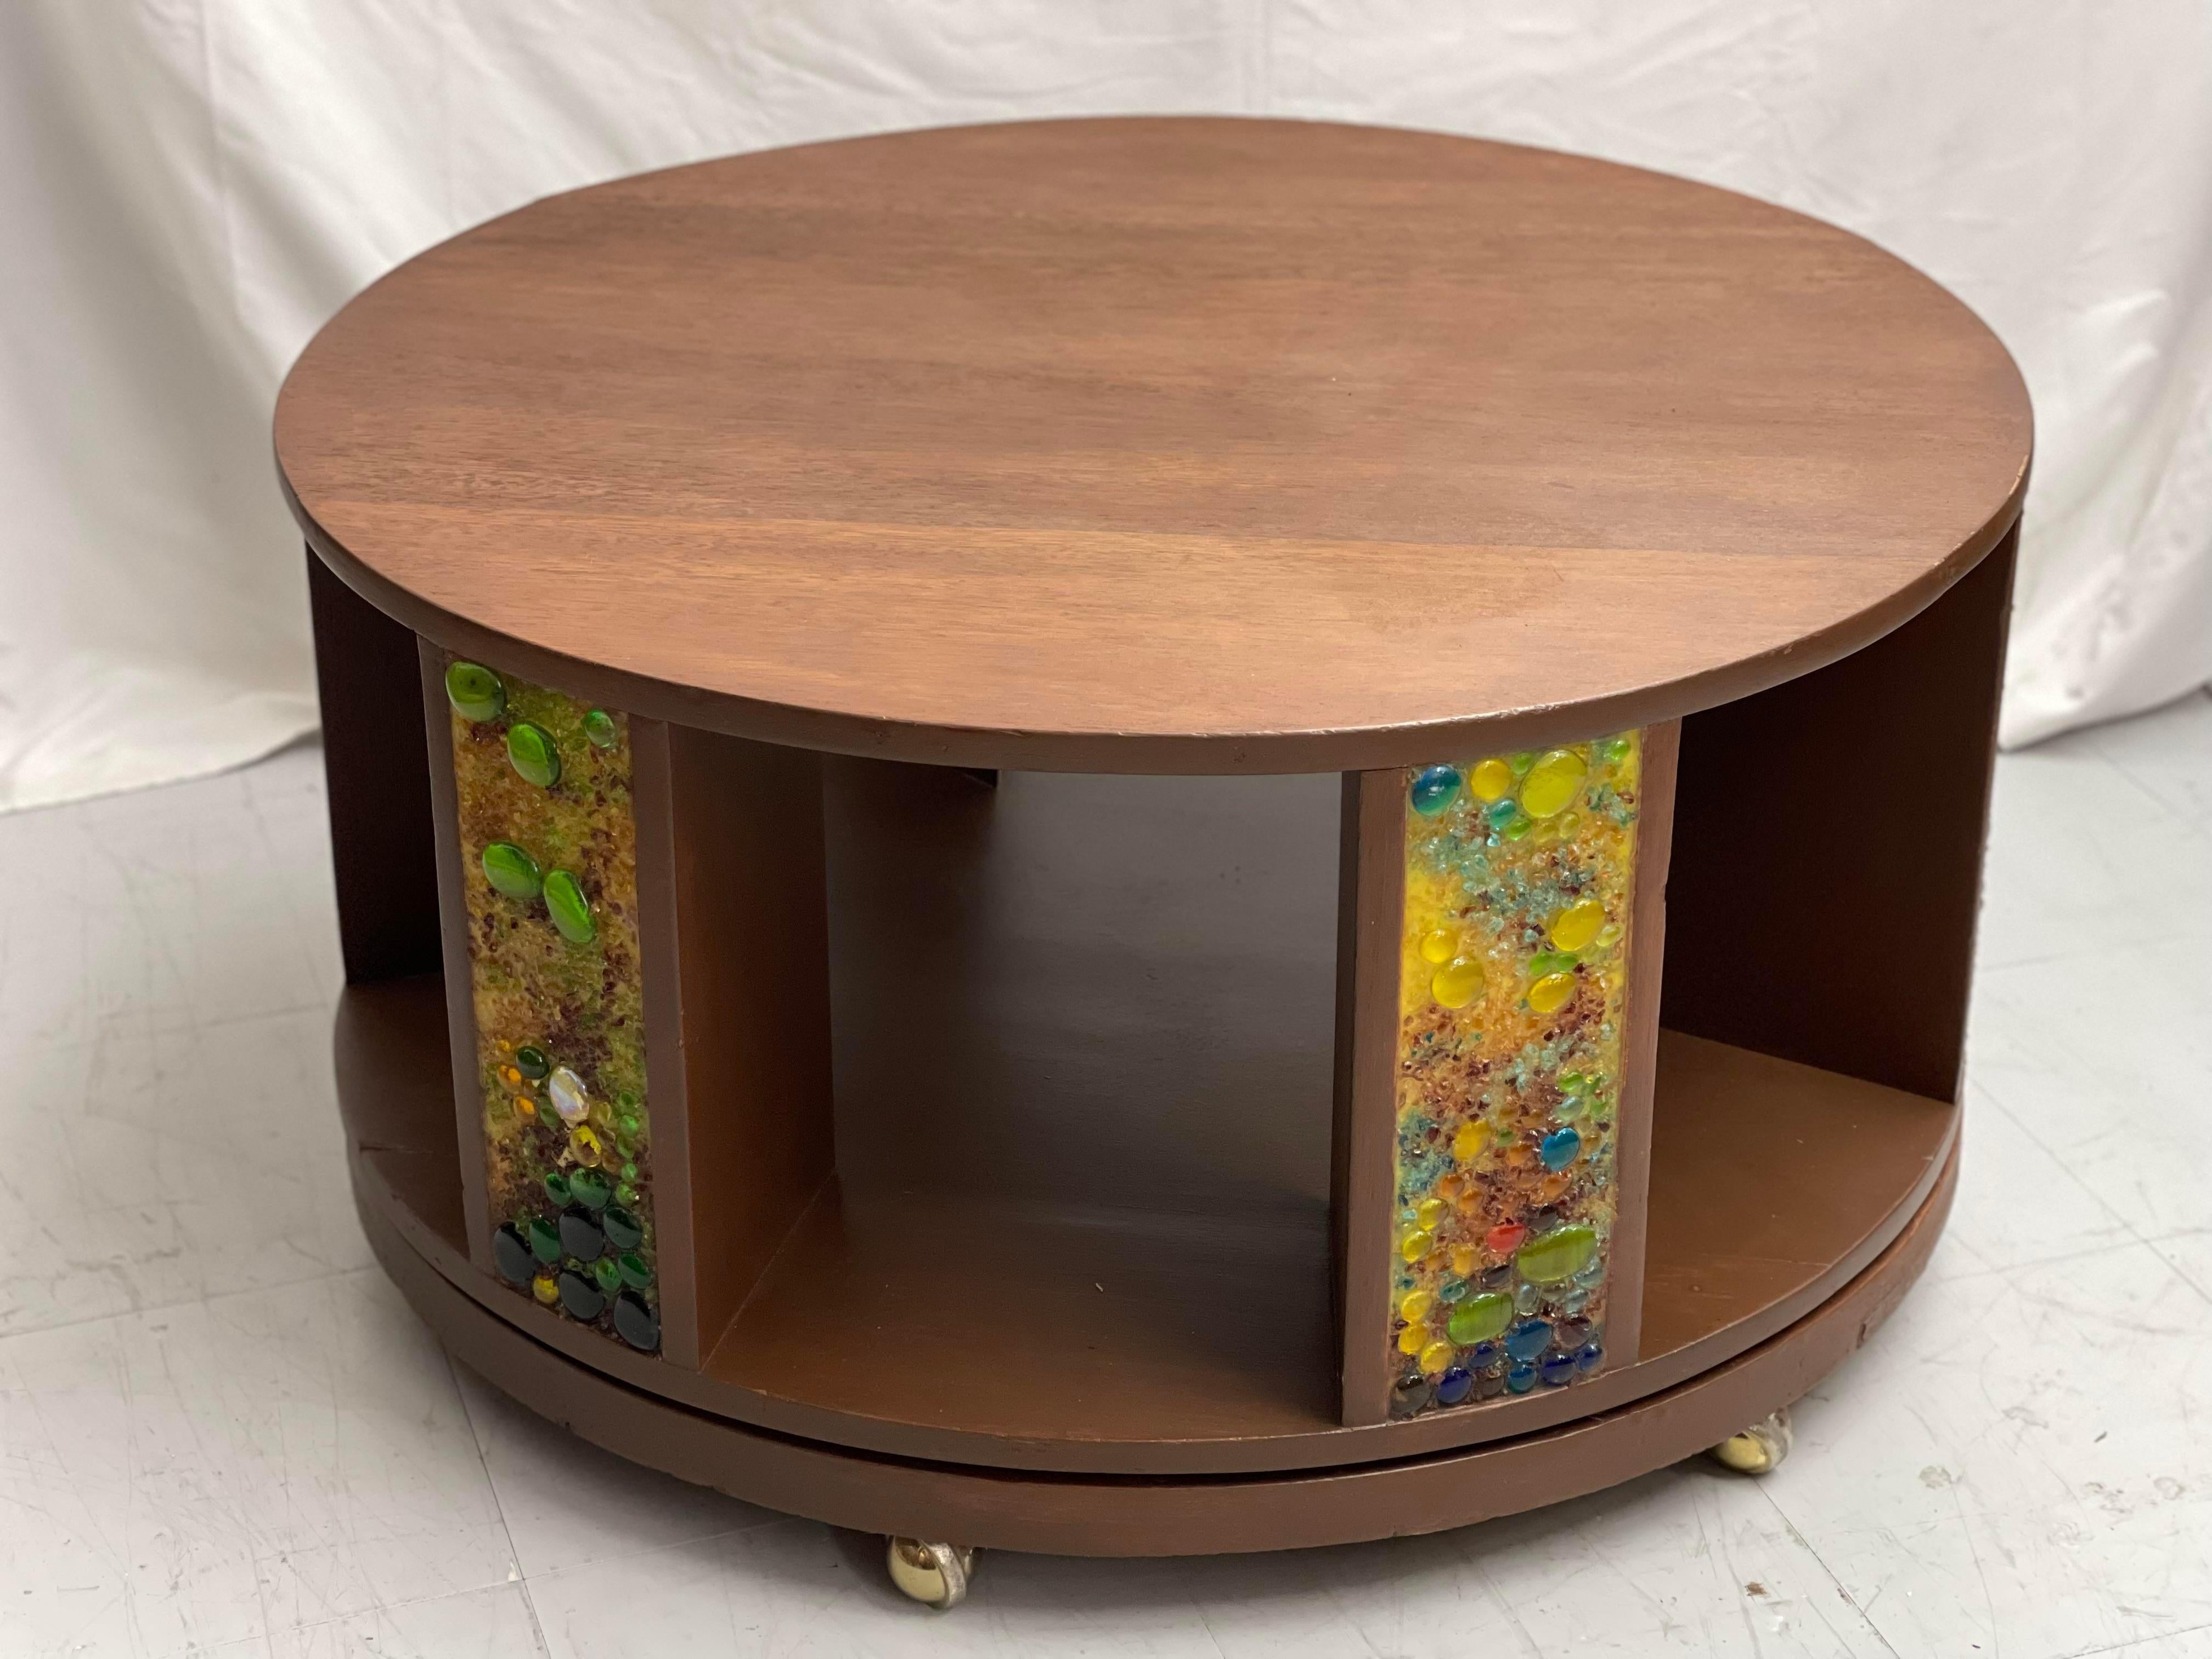 Vintage Art Deco style round solid walnut coffee table set after Gilbert Rohde. The coffee table is set on casters with classic wood construction, beautiful wood grain, quality craftsmanship, great style and form.

Dimensions: 36